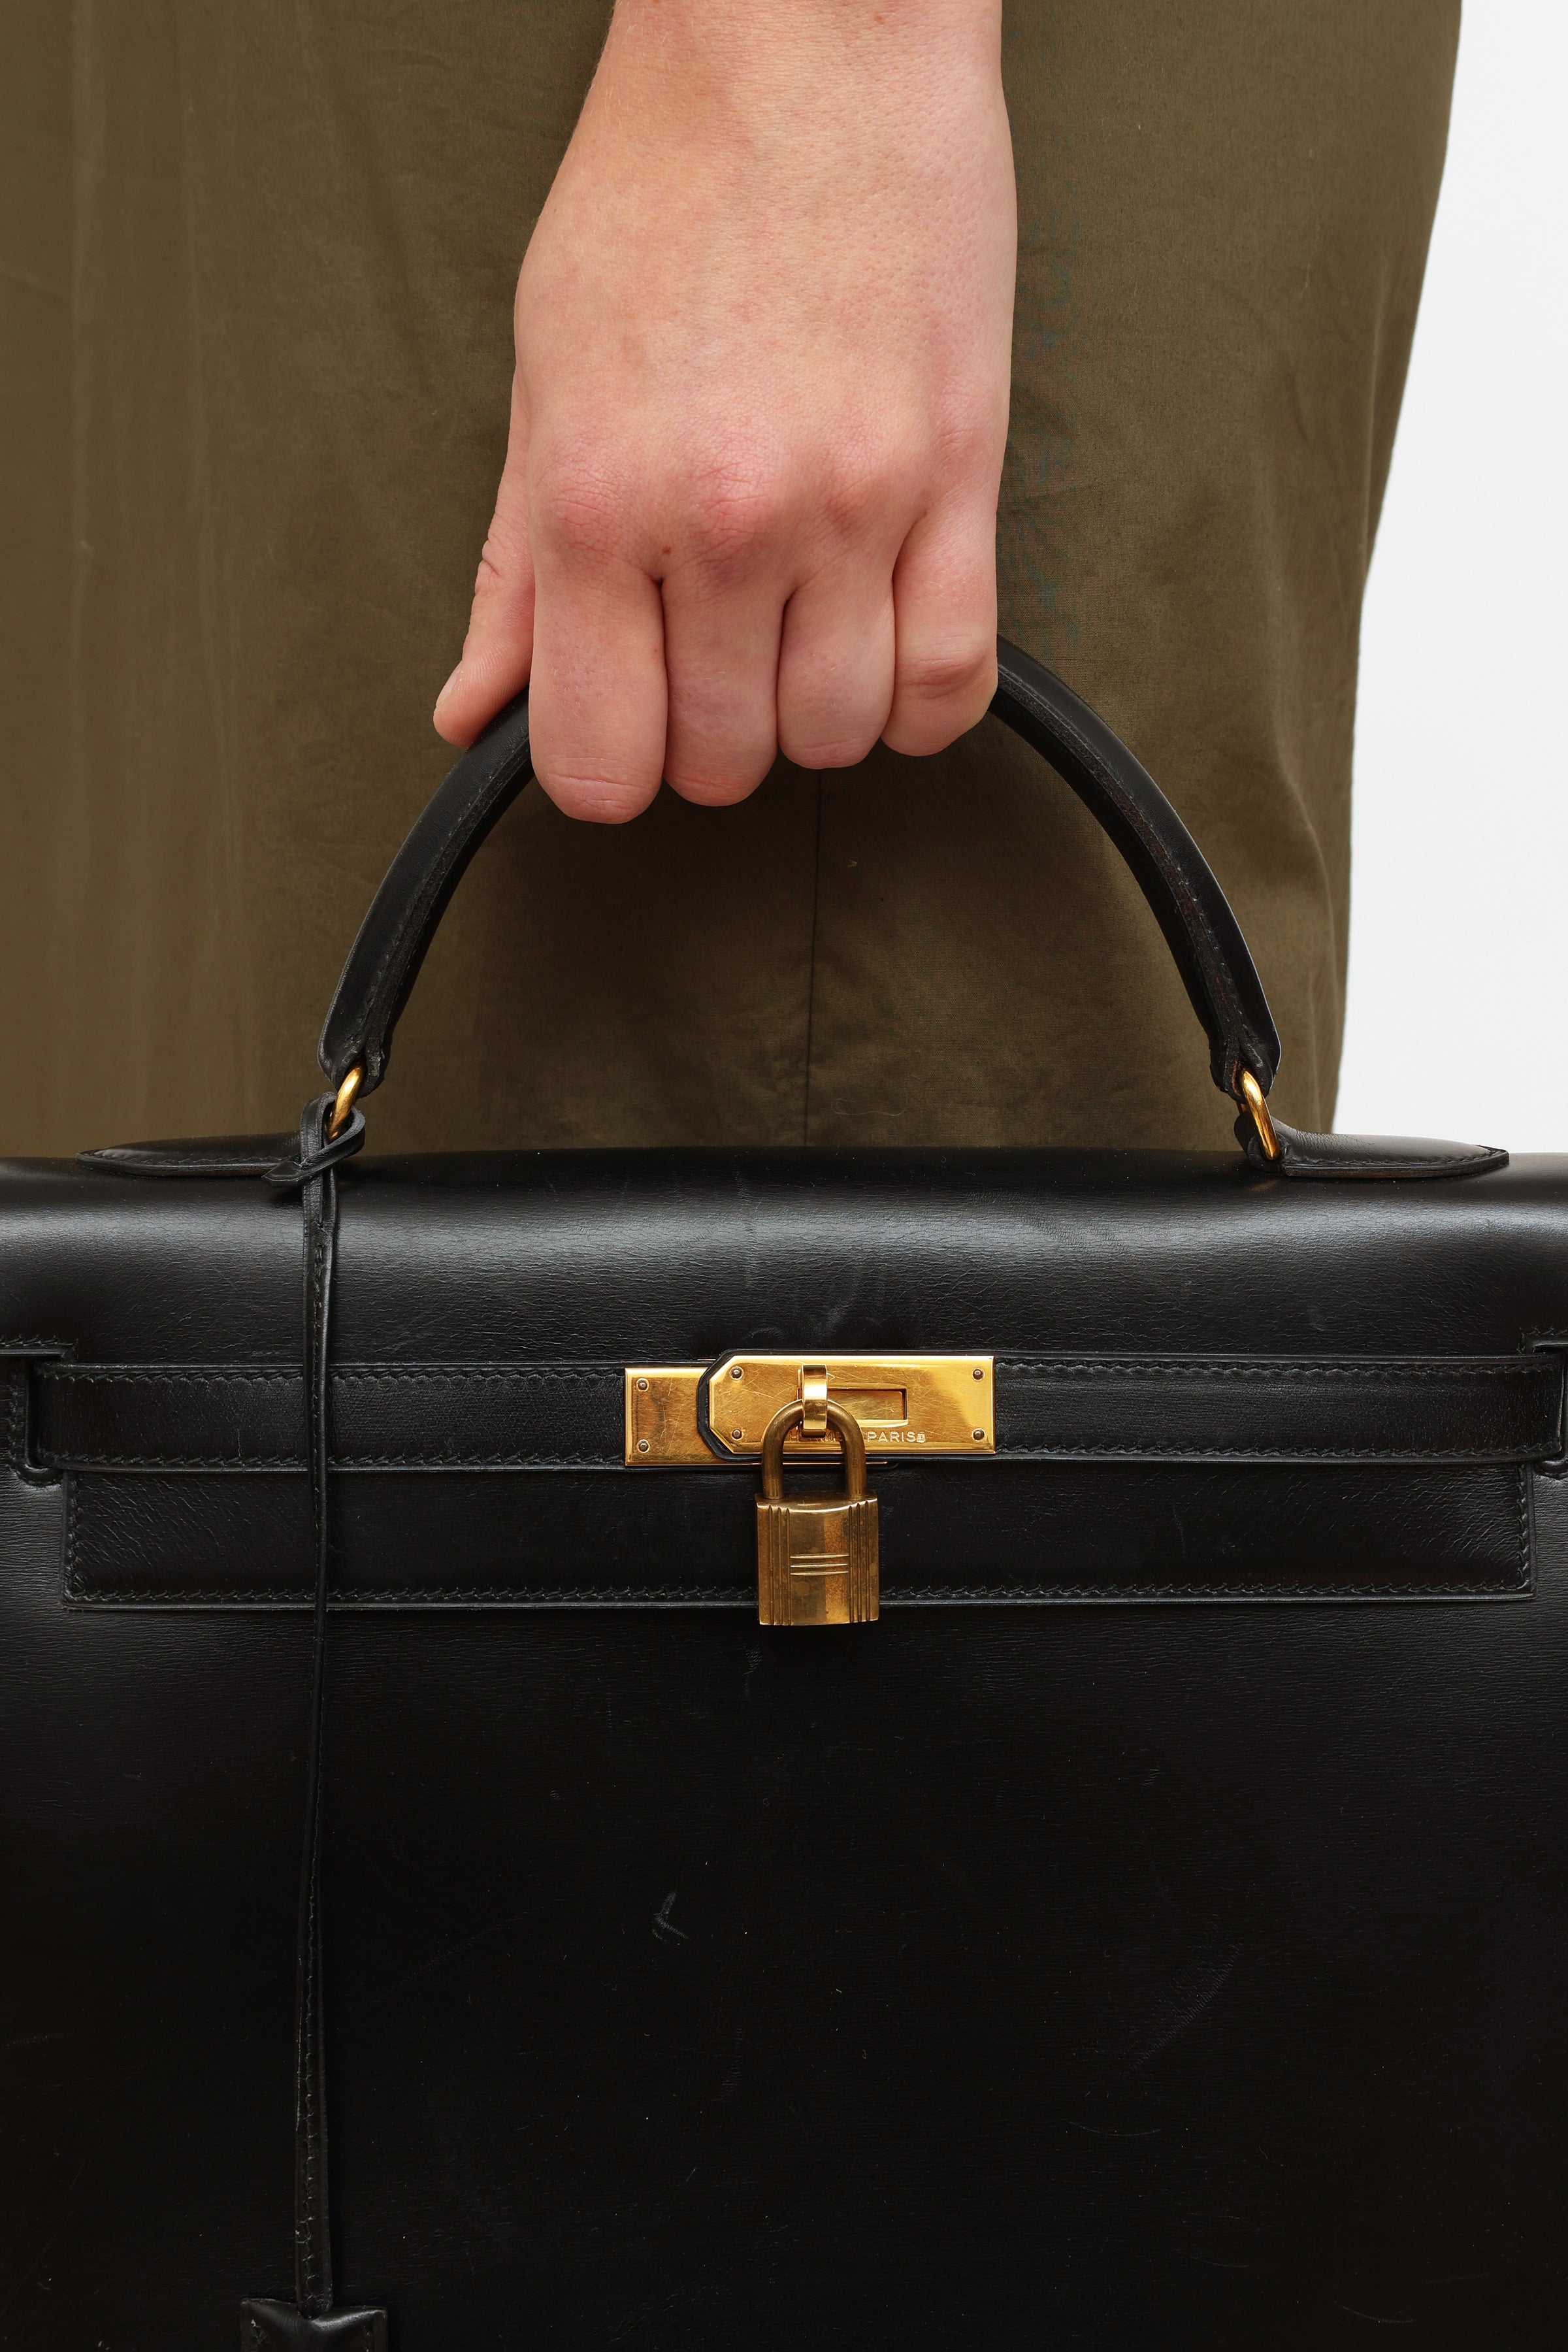 Vintage Hermes Kelly 32 From 1988 in Black Box Leather